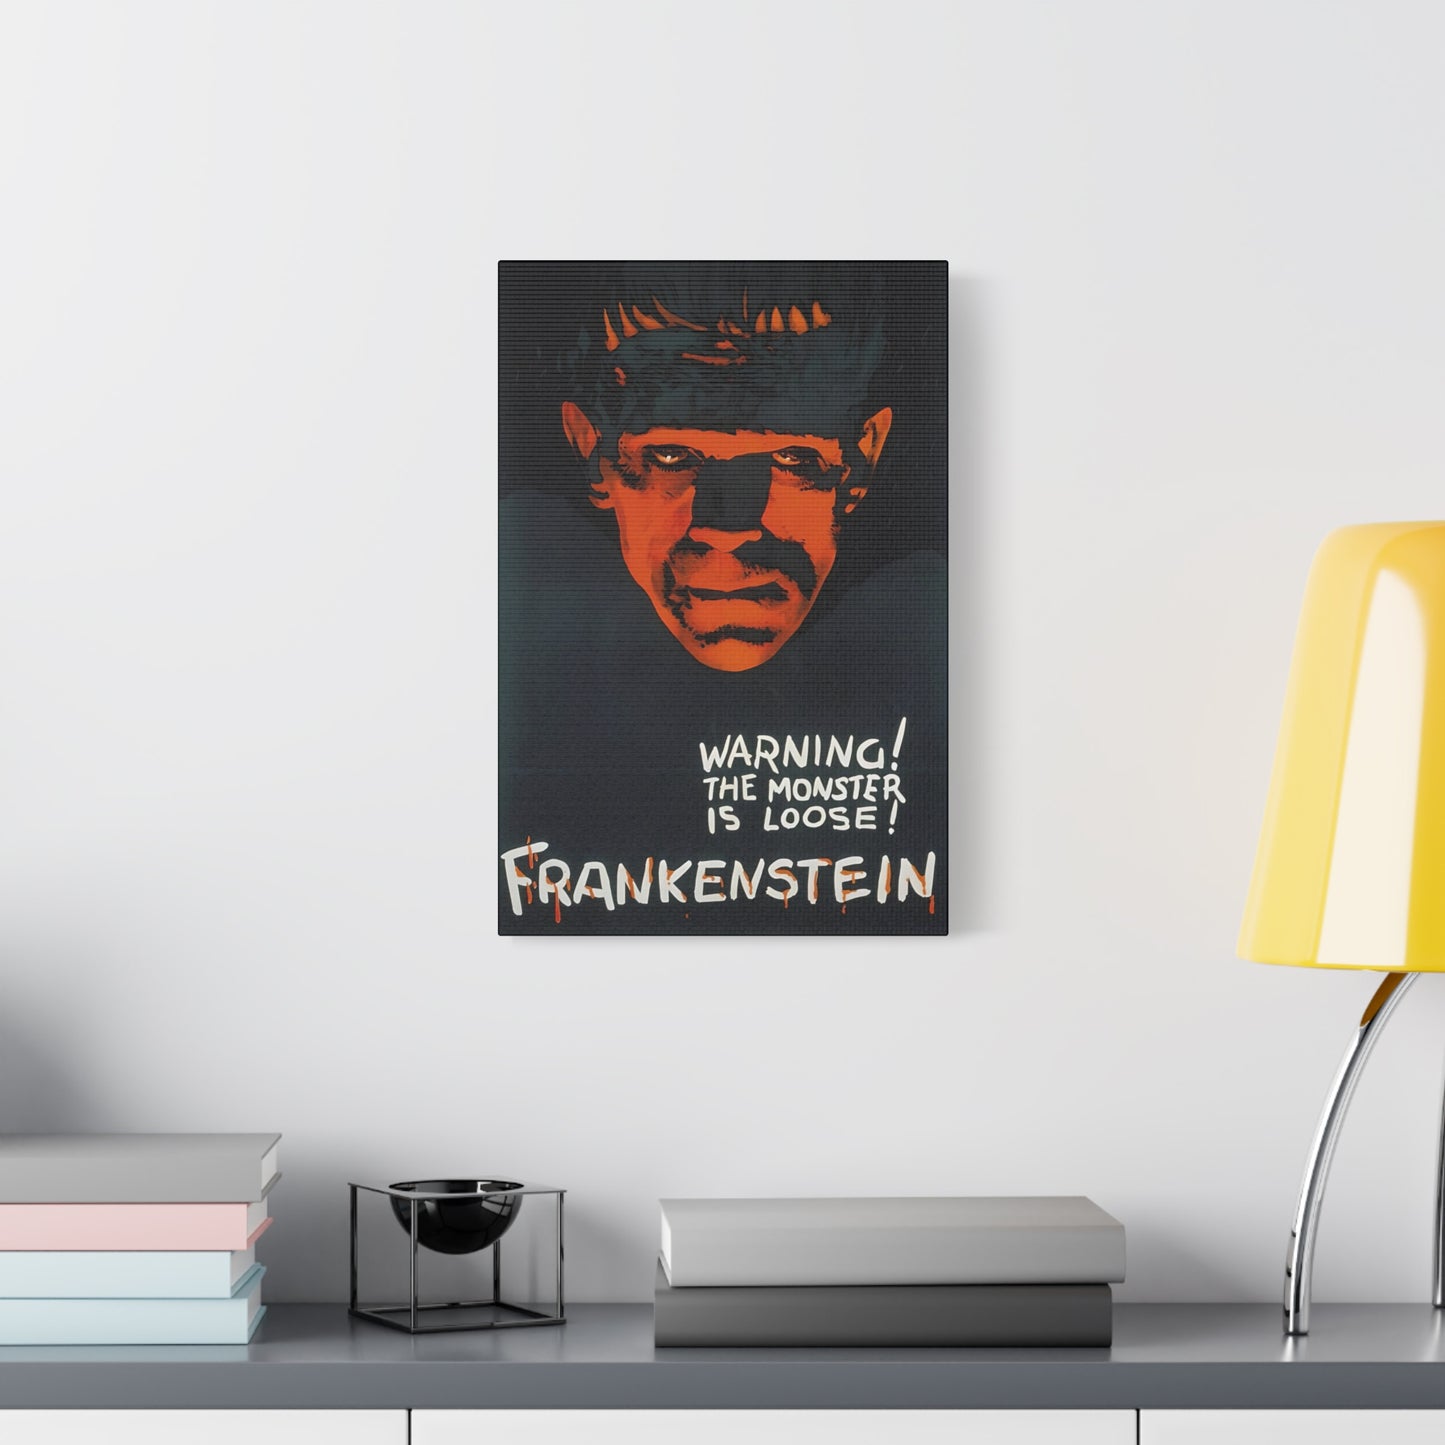 Retro Movie Classic Horror Frankenstein Poster Art Canvas, Stretched, 1.25" Thick - FREE SHIPPING